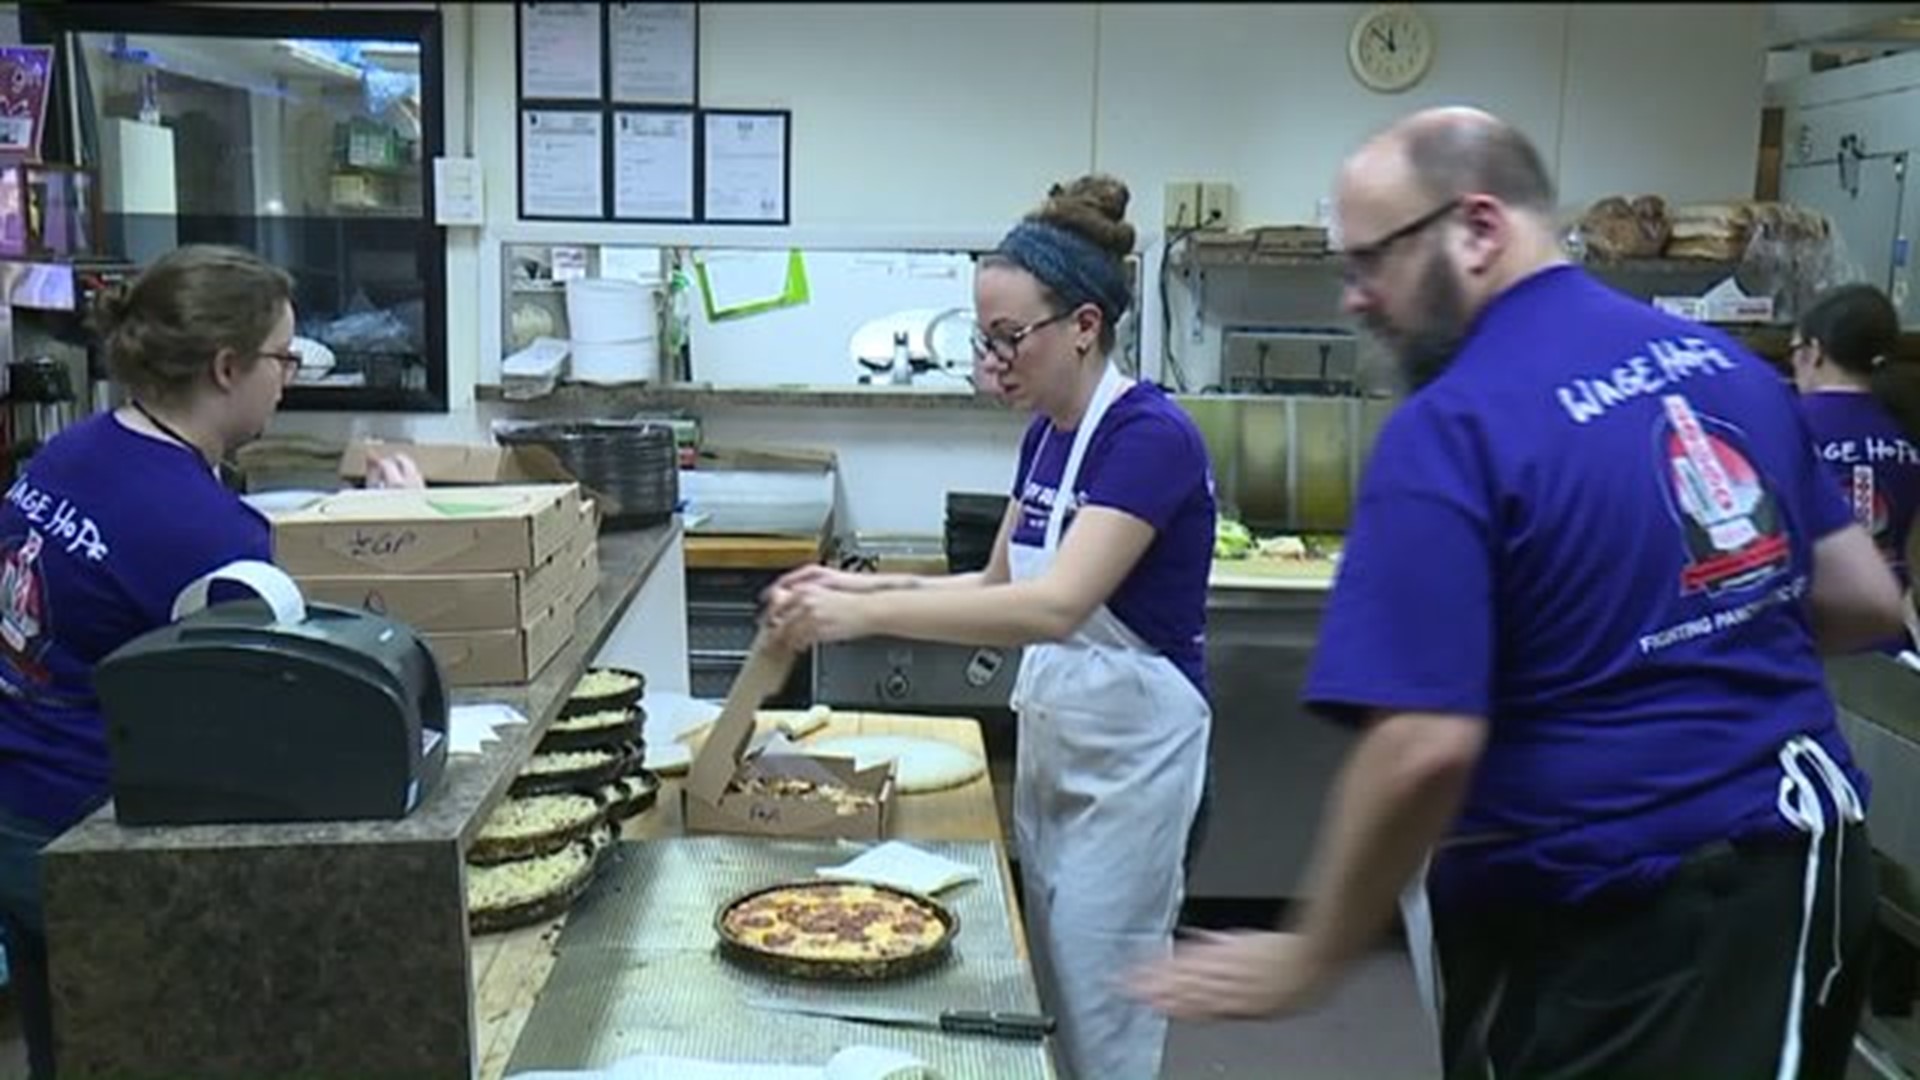 Pizza Lovers Help Fight Cancer